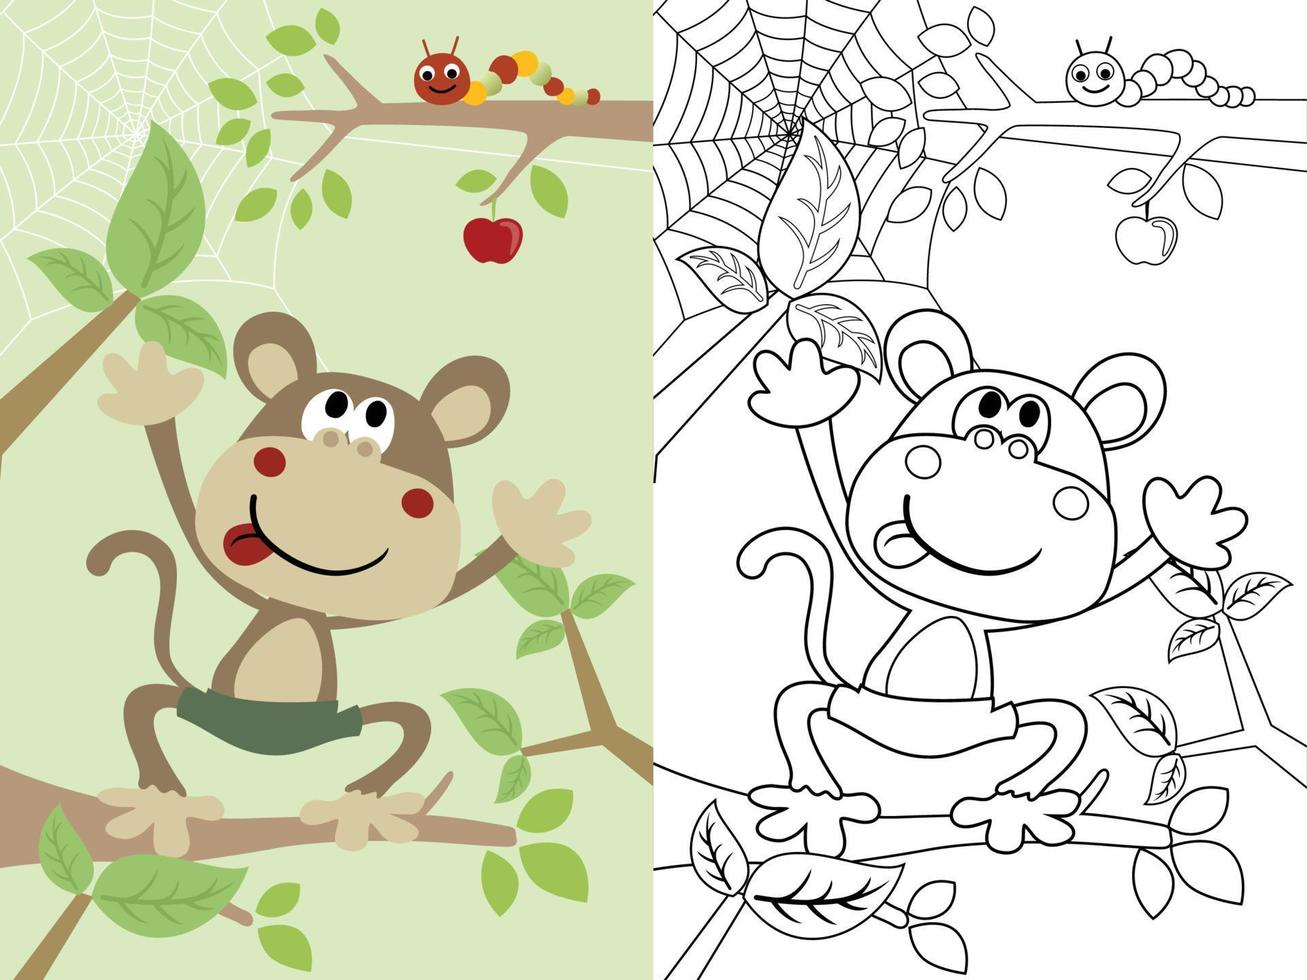 vector illustration of funny monkey cartoon on tree with caterpillar, coloring book or page